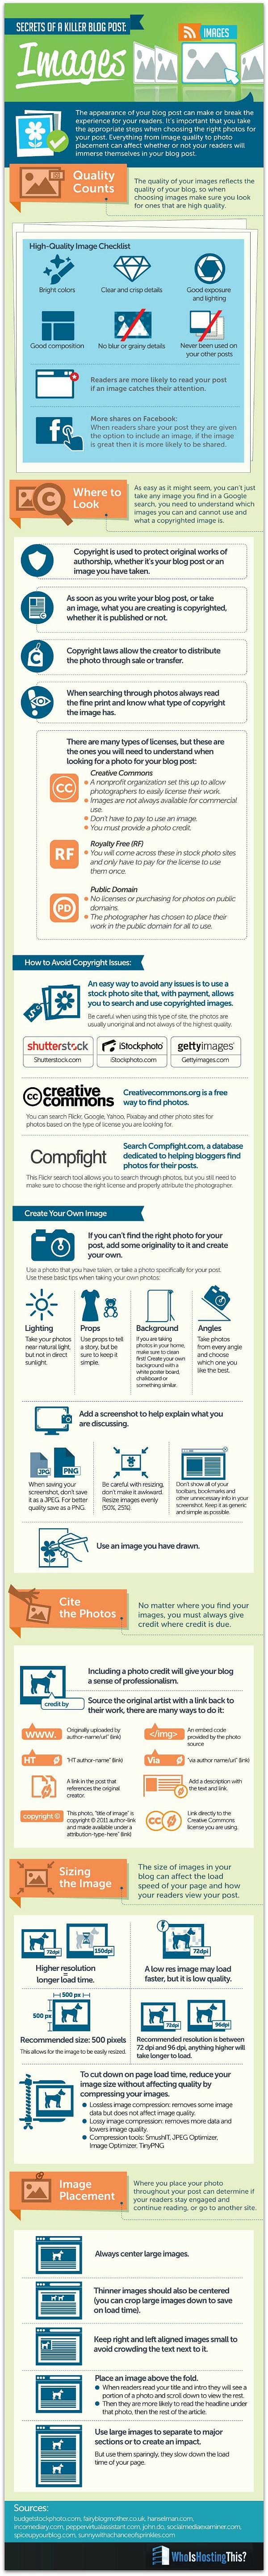 Online_Images_Copyright_Tips__Infographic